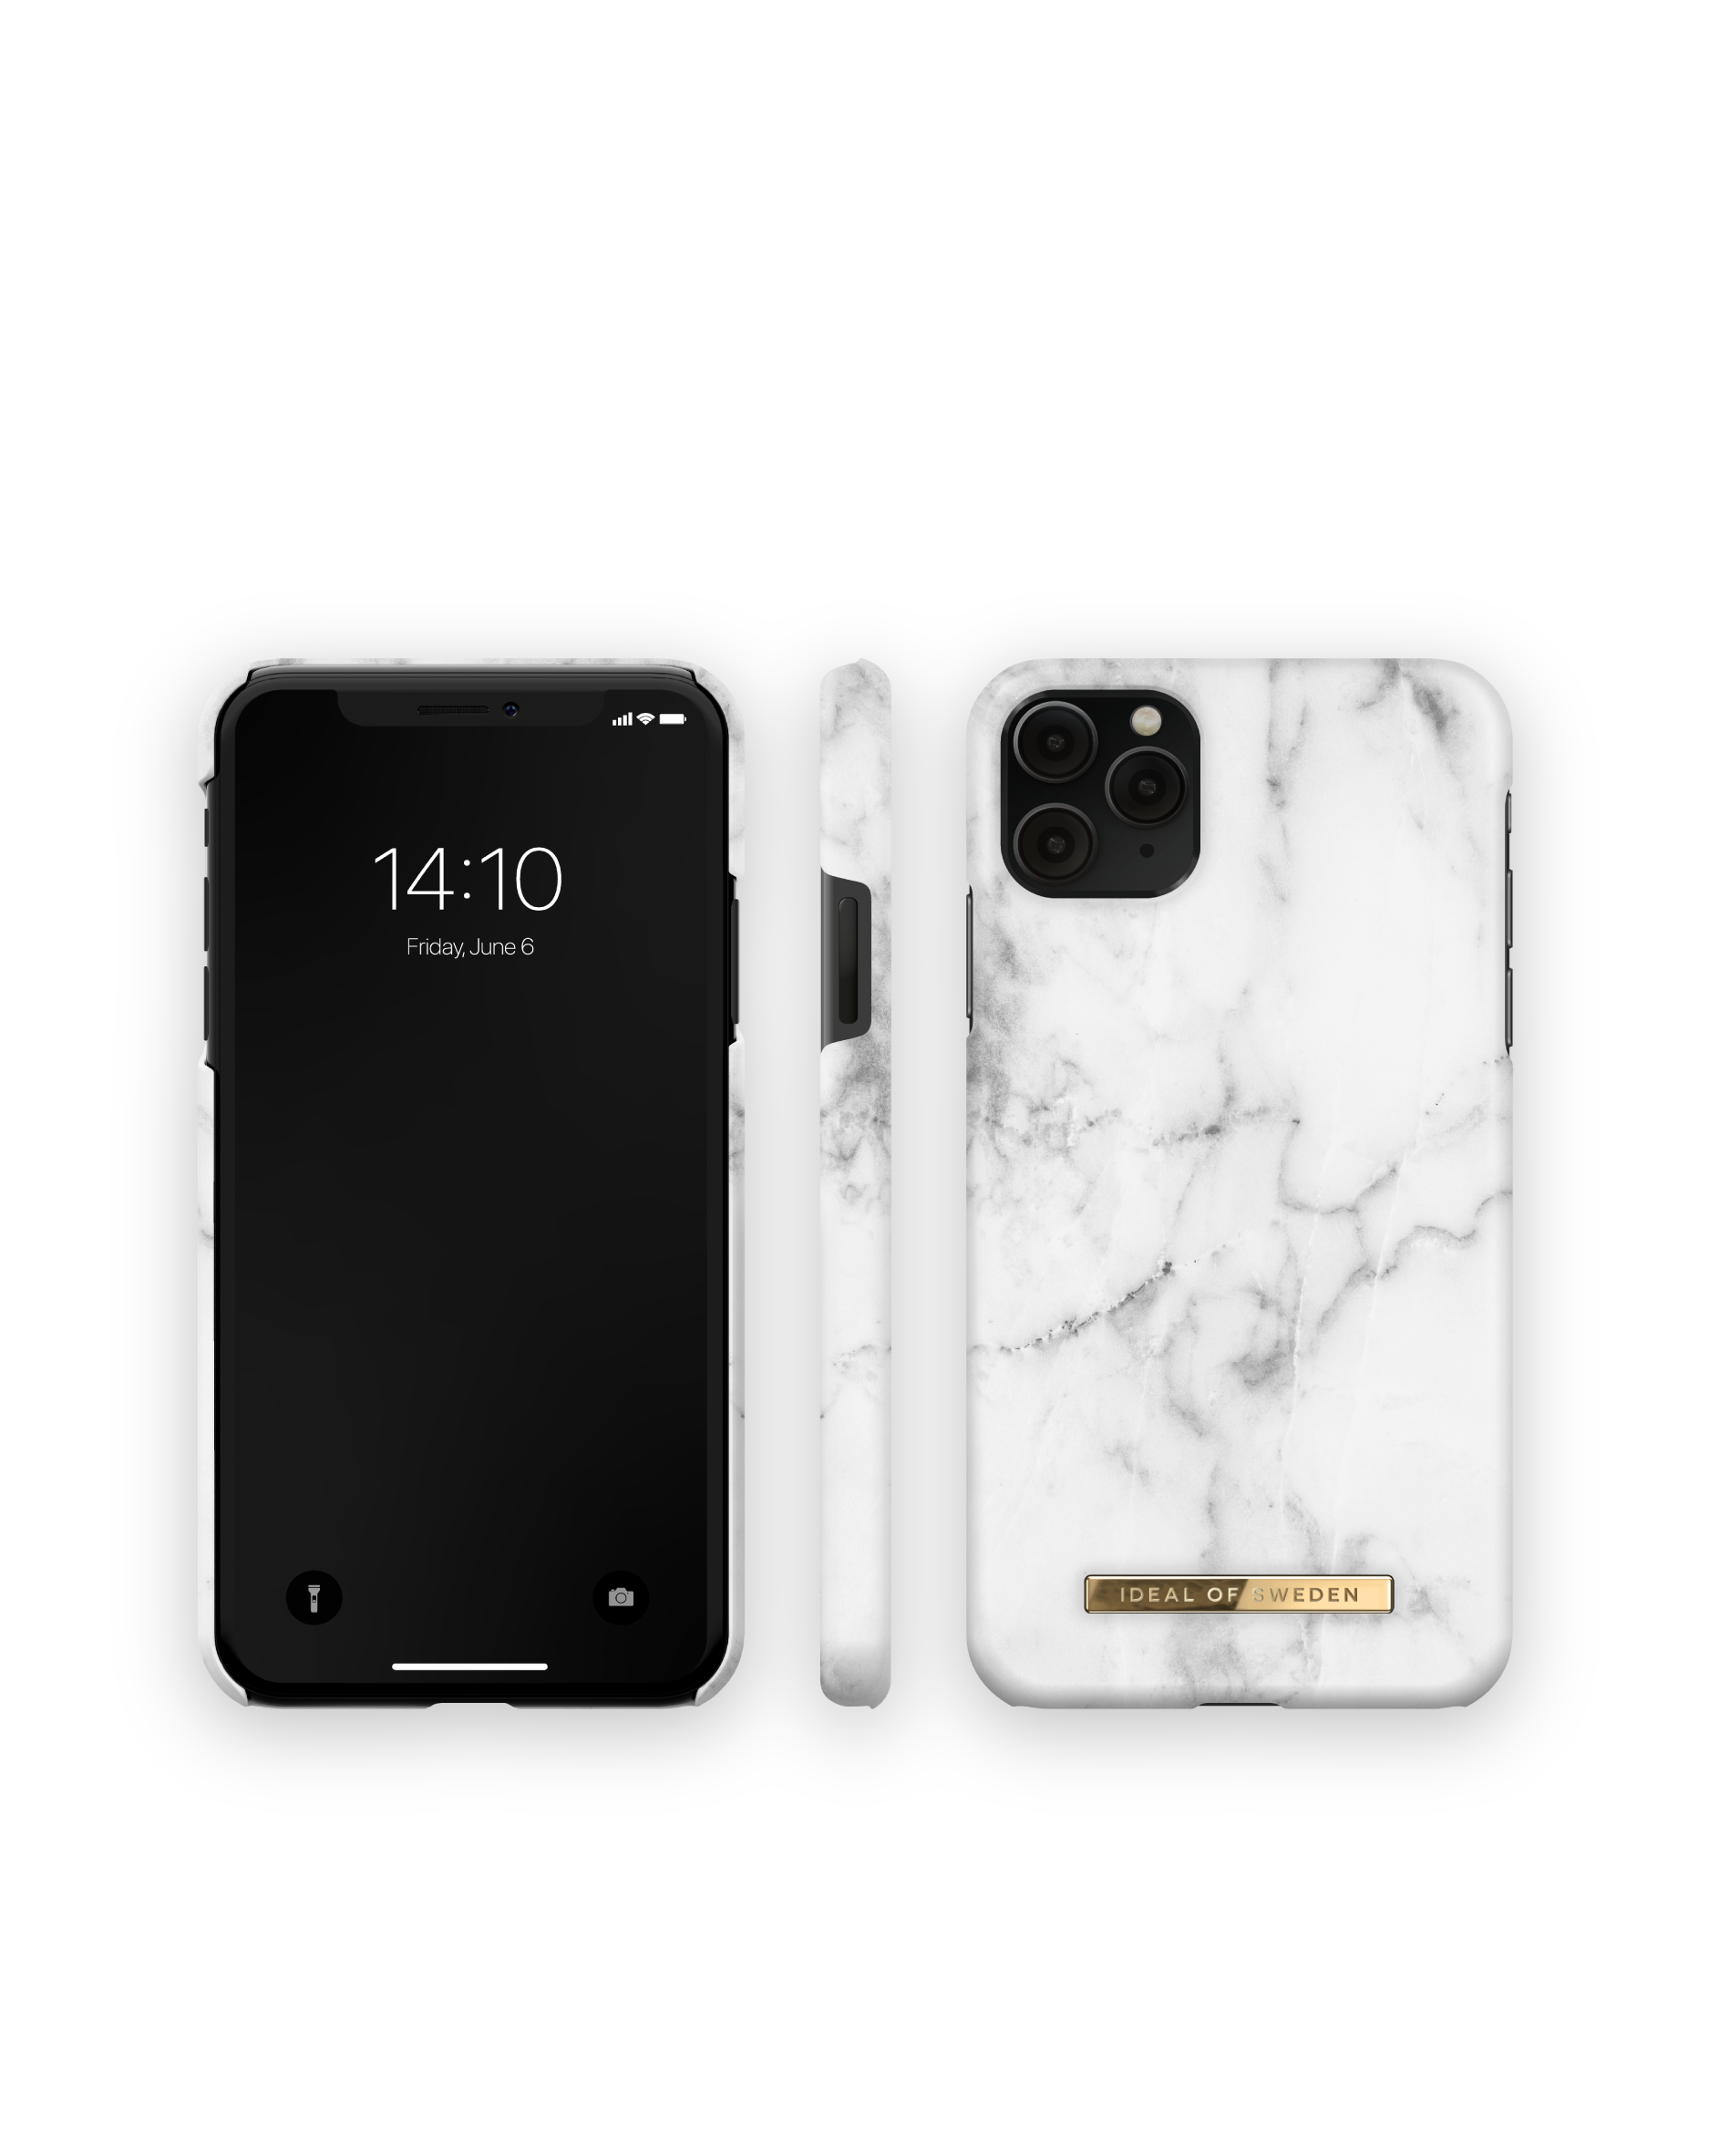 IDEAL OF Apple iPhone Backcover, iPhone Apple, 11 Apple Max, SWEDEN Pro IDFC-I1965-22, Marble XS White Max